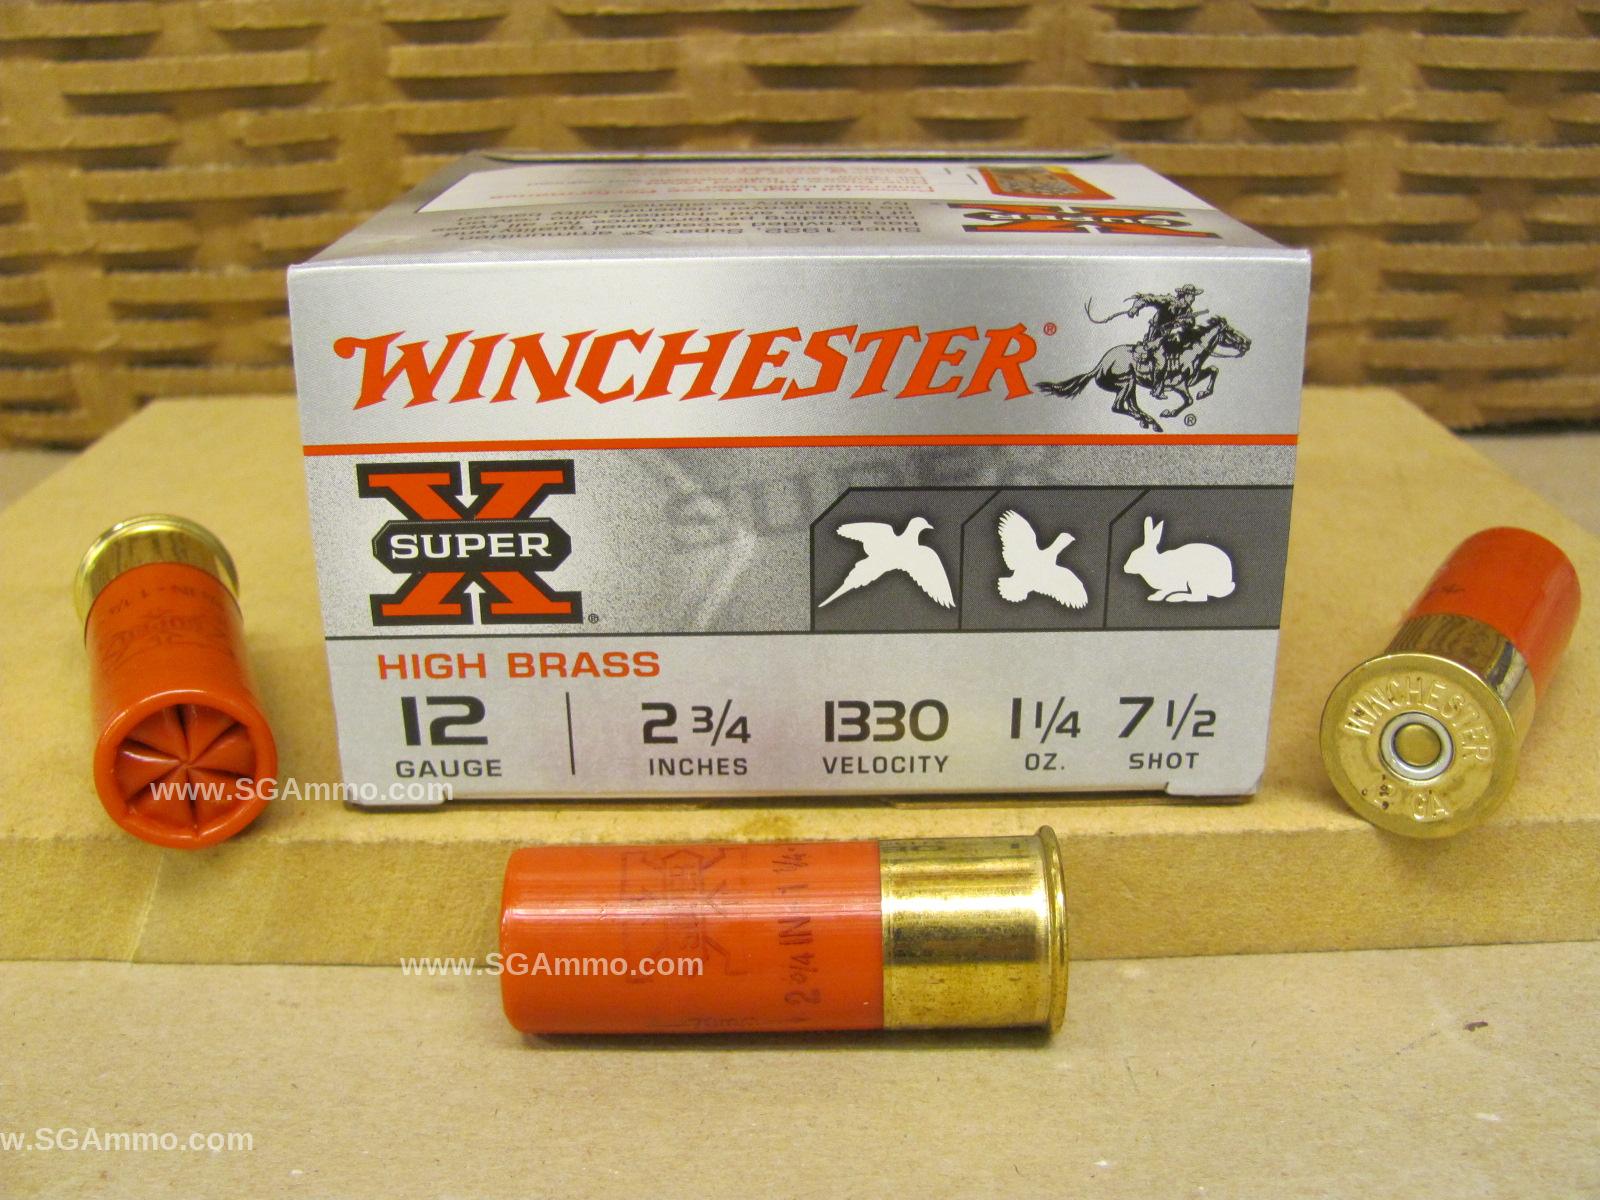 25 Round Box - 12 Gauge 2.75 Inch 1-1/4 Ounce 7.5 Shot Winchester High Brass Game Load Ammo - X127 